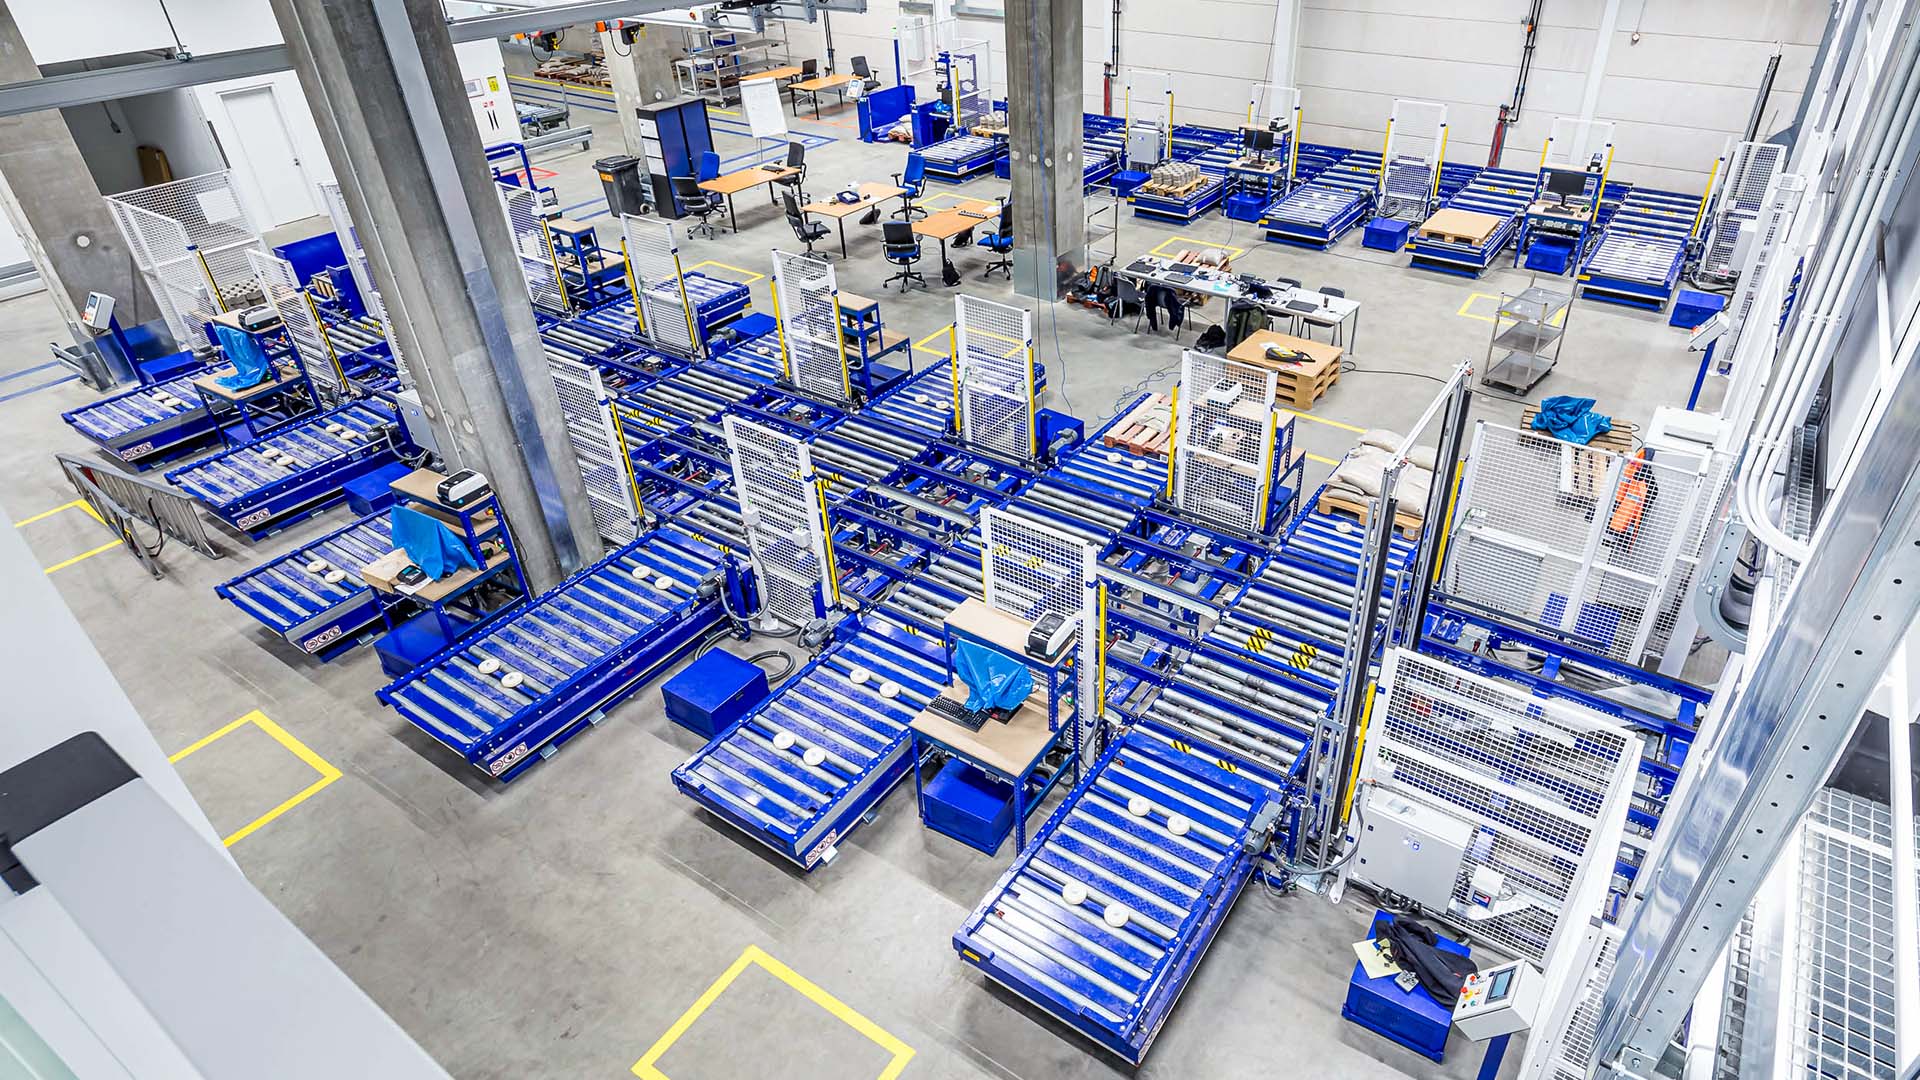 Overhead view of ASML's warehouse logistics, showcasing rows of blue storage racks with equipment and components.